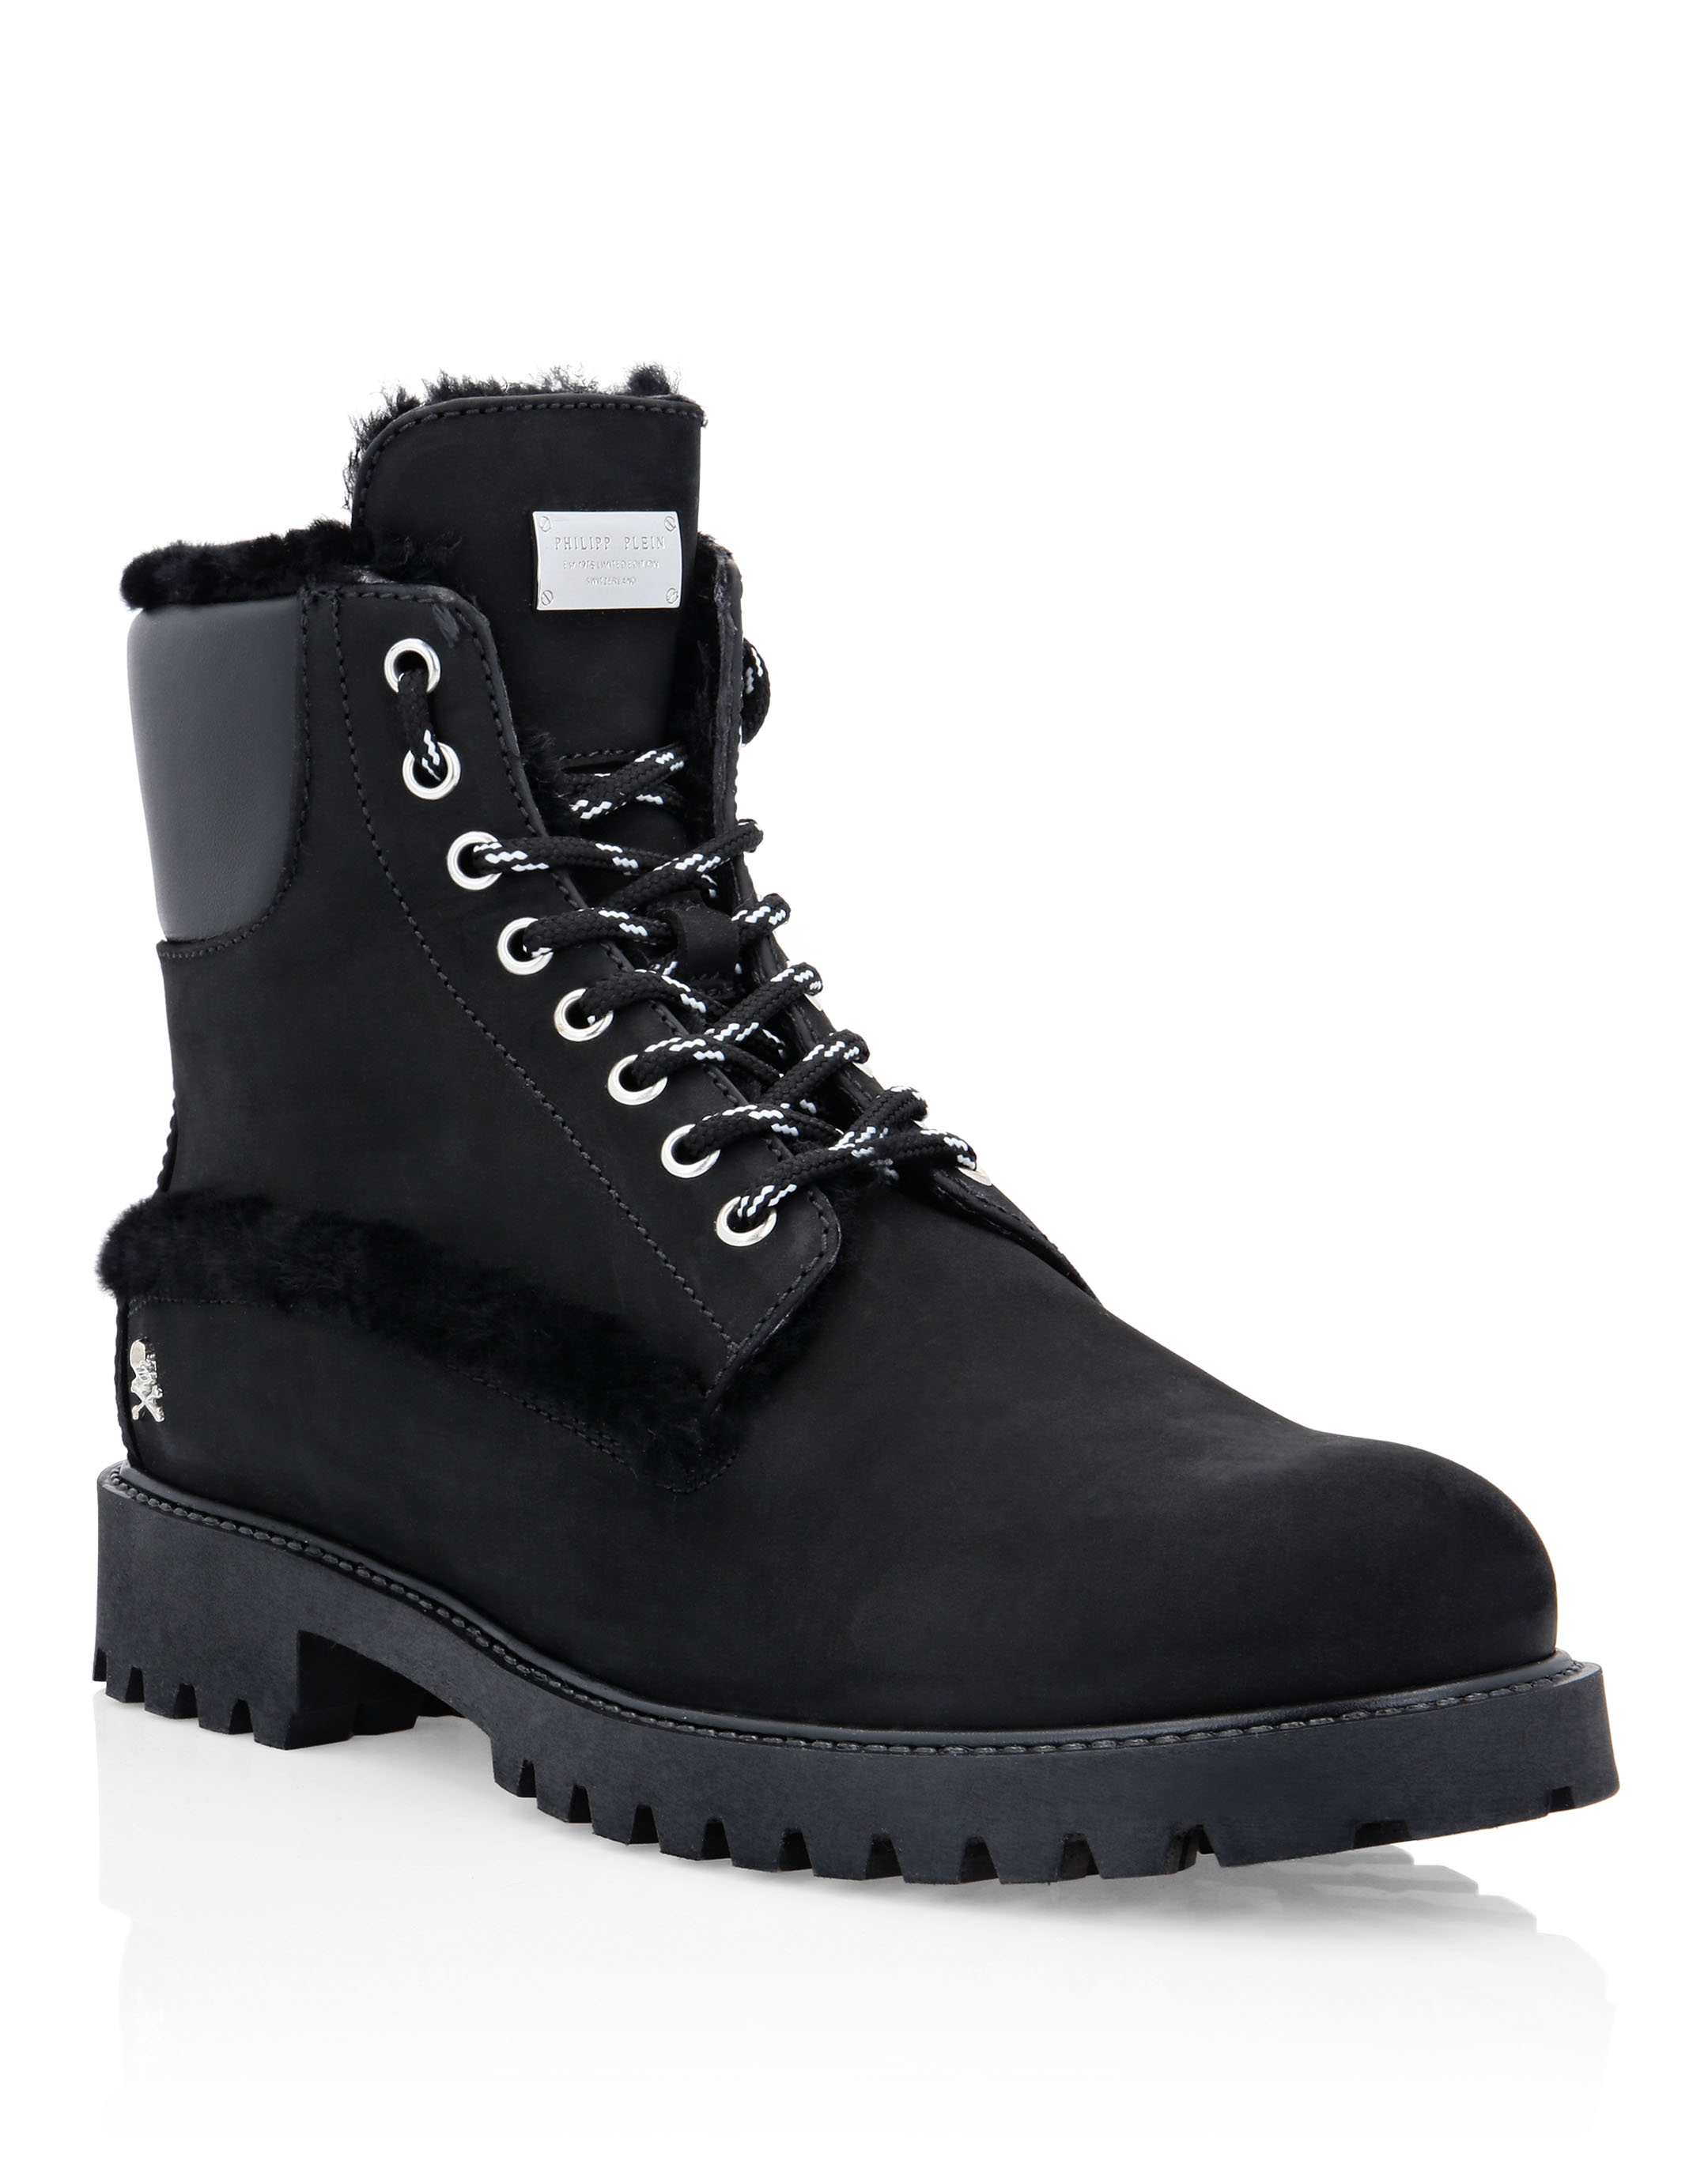 Leather Boots with shearling inside Iconic Plein | Philipp Plein Outlet